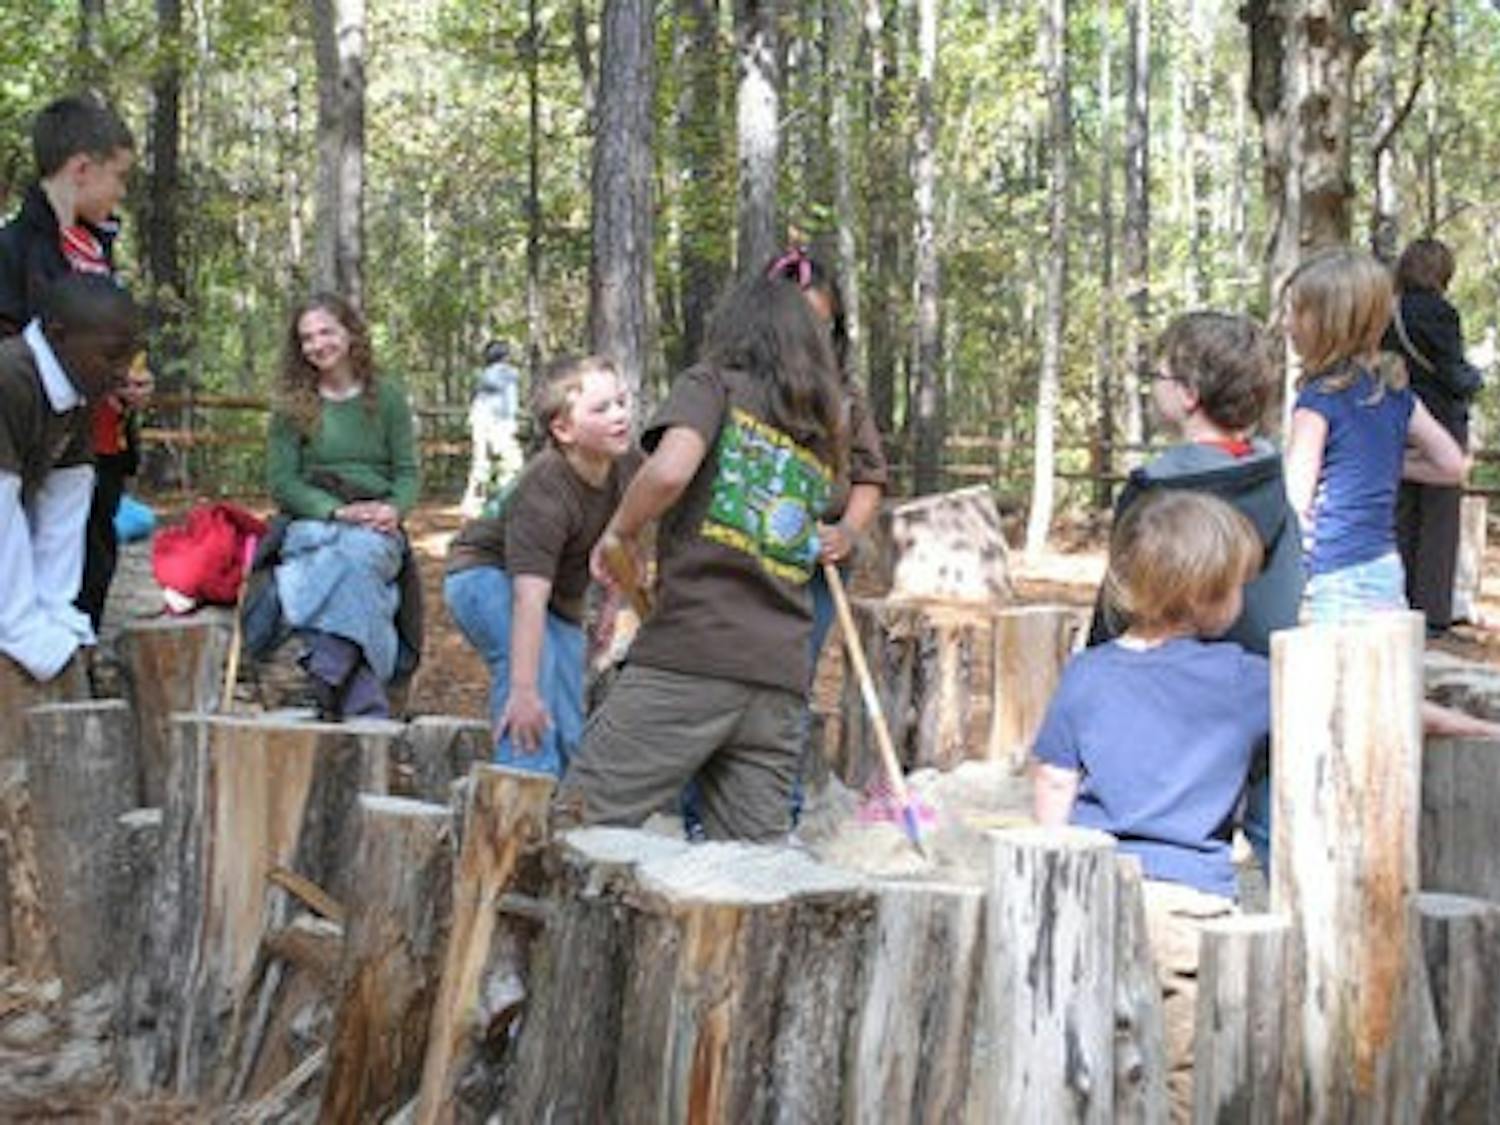 Fifth-grade students from Cary Woods Elementary play on the Nature Playground at the Louise Kreher Forest Ecology Preserve Nov. 9. The playground is designed to provide fun, naturalistic play spaces with logs, tunnels, trees and unique structures, such as a tree house and an "eagle's nest" for kids to explore. (Elaine Busby / Assistant PHOTO EDITOR)